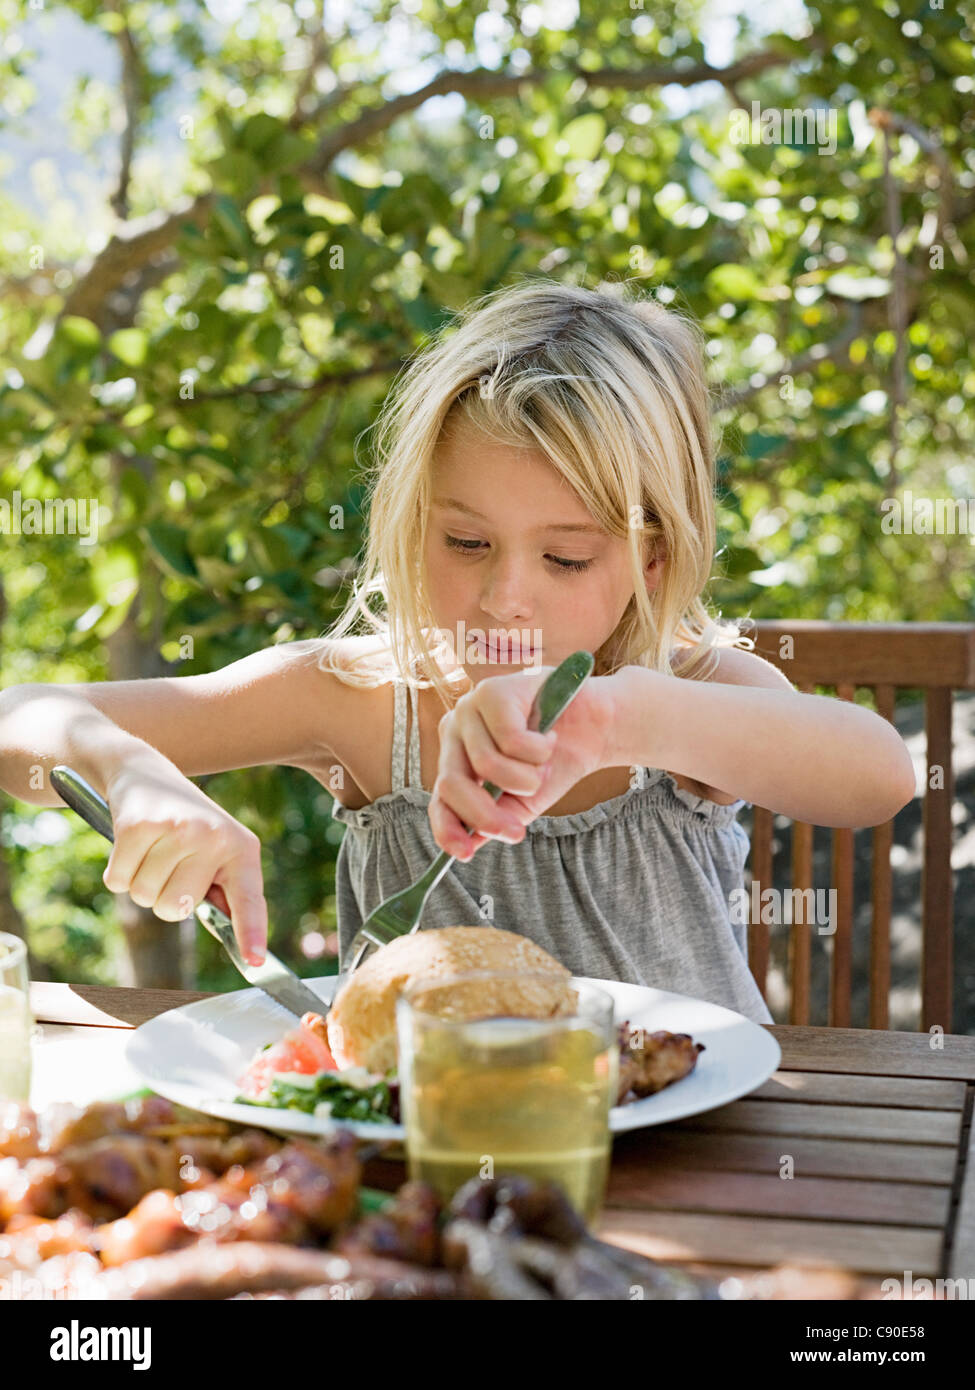 Girl eating meal, outdoors Stock Photo